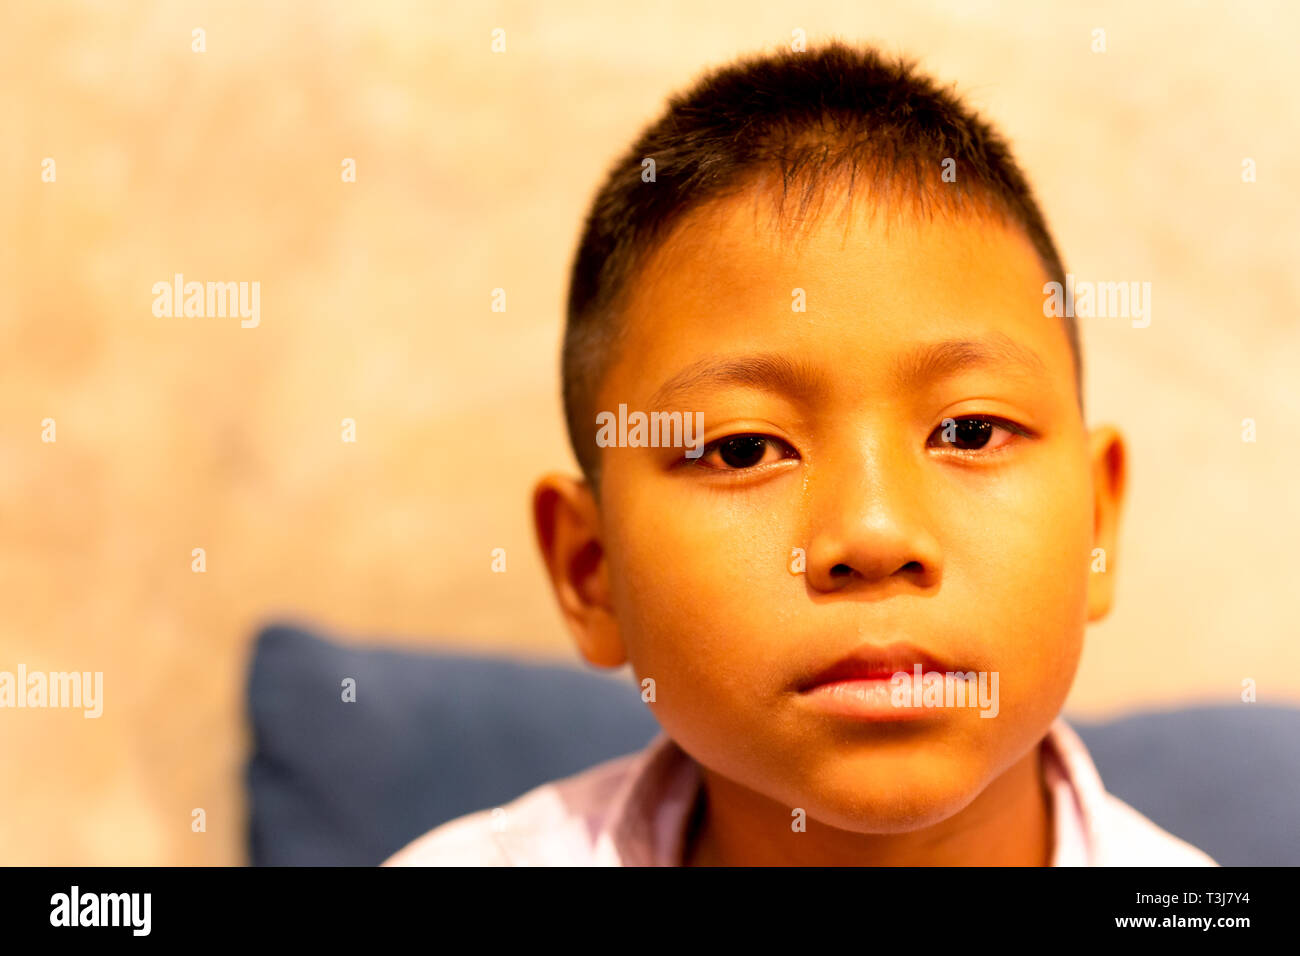 Portrait of asian boy crying with tear on his face. Stock Photo